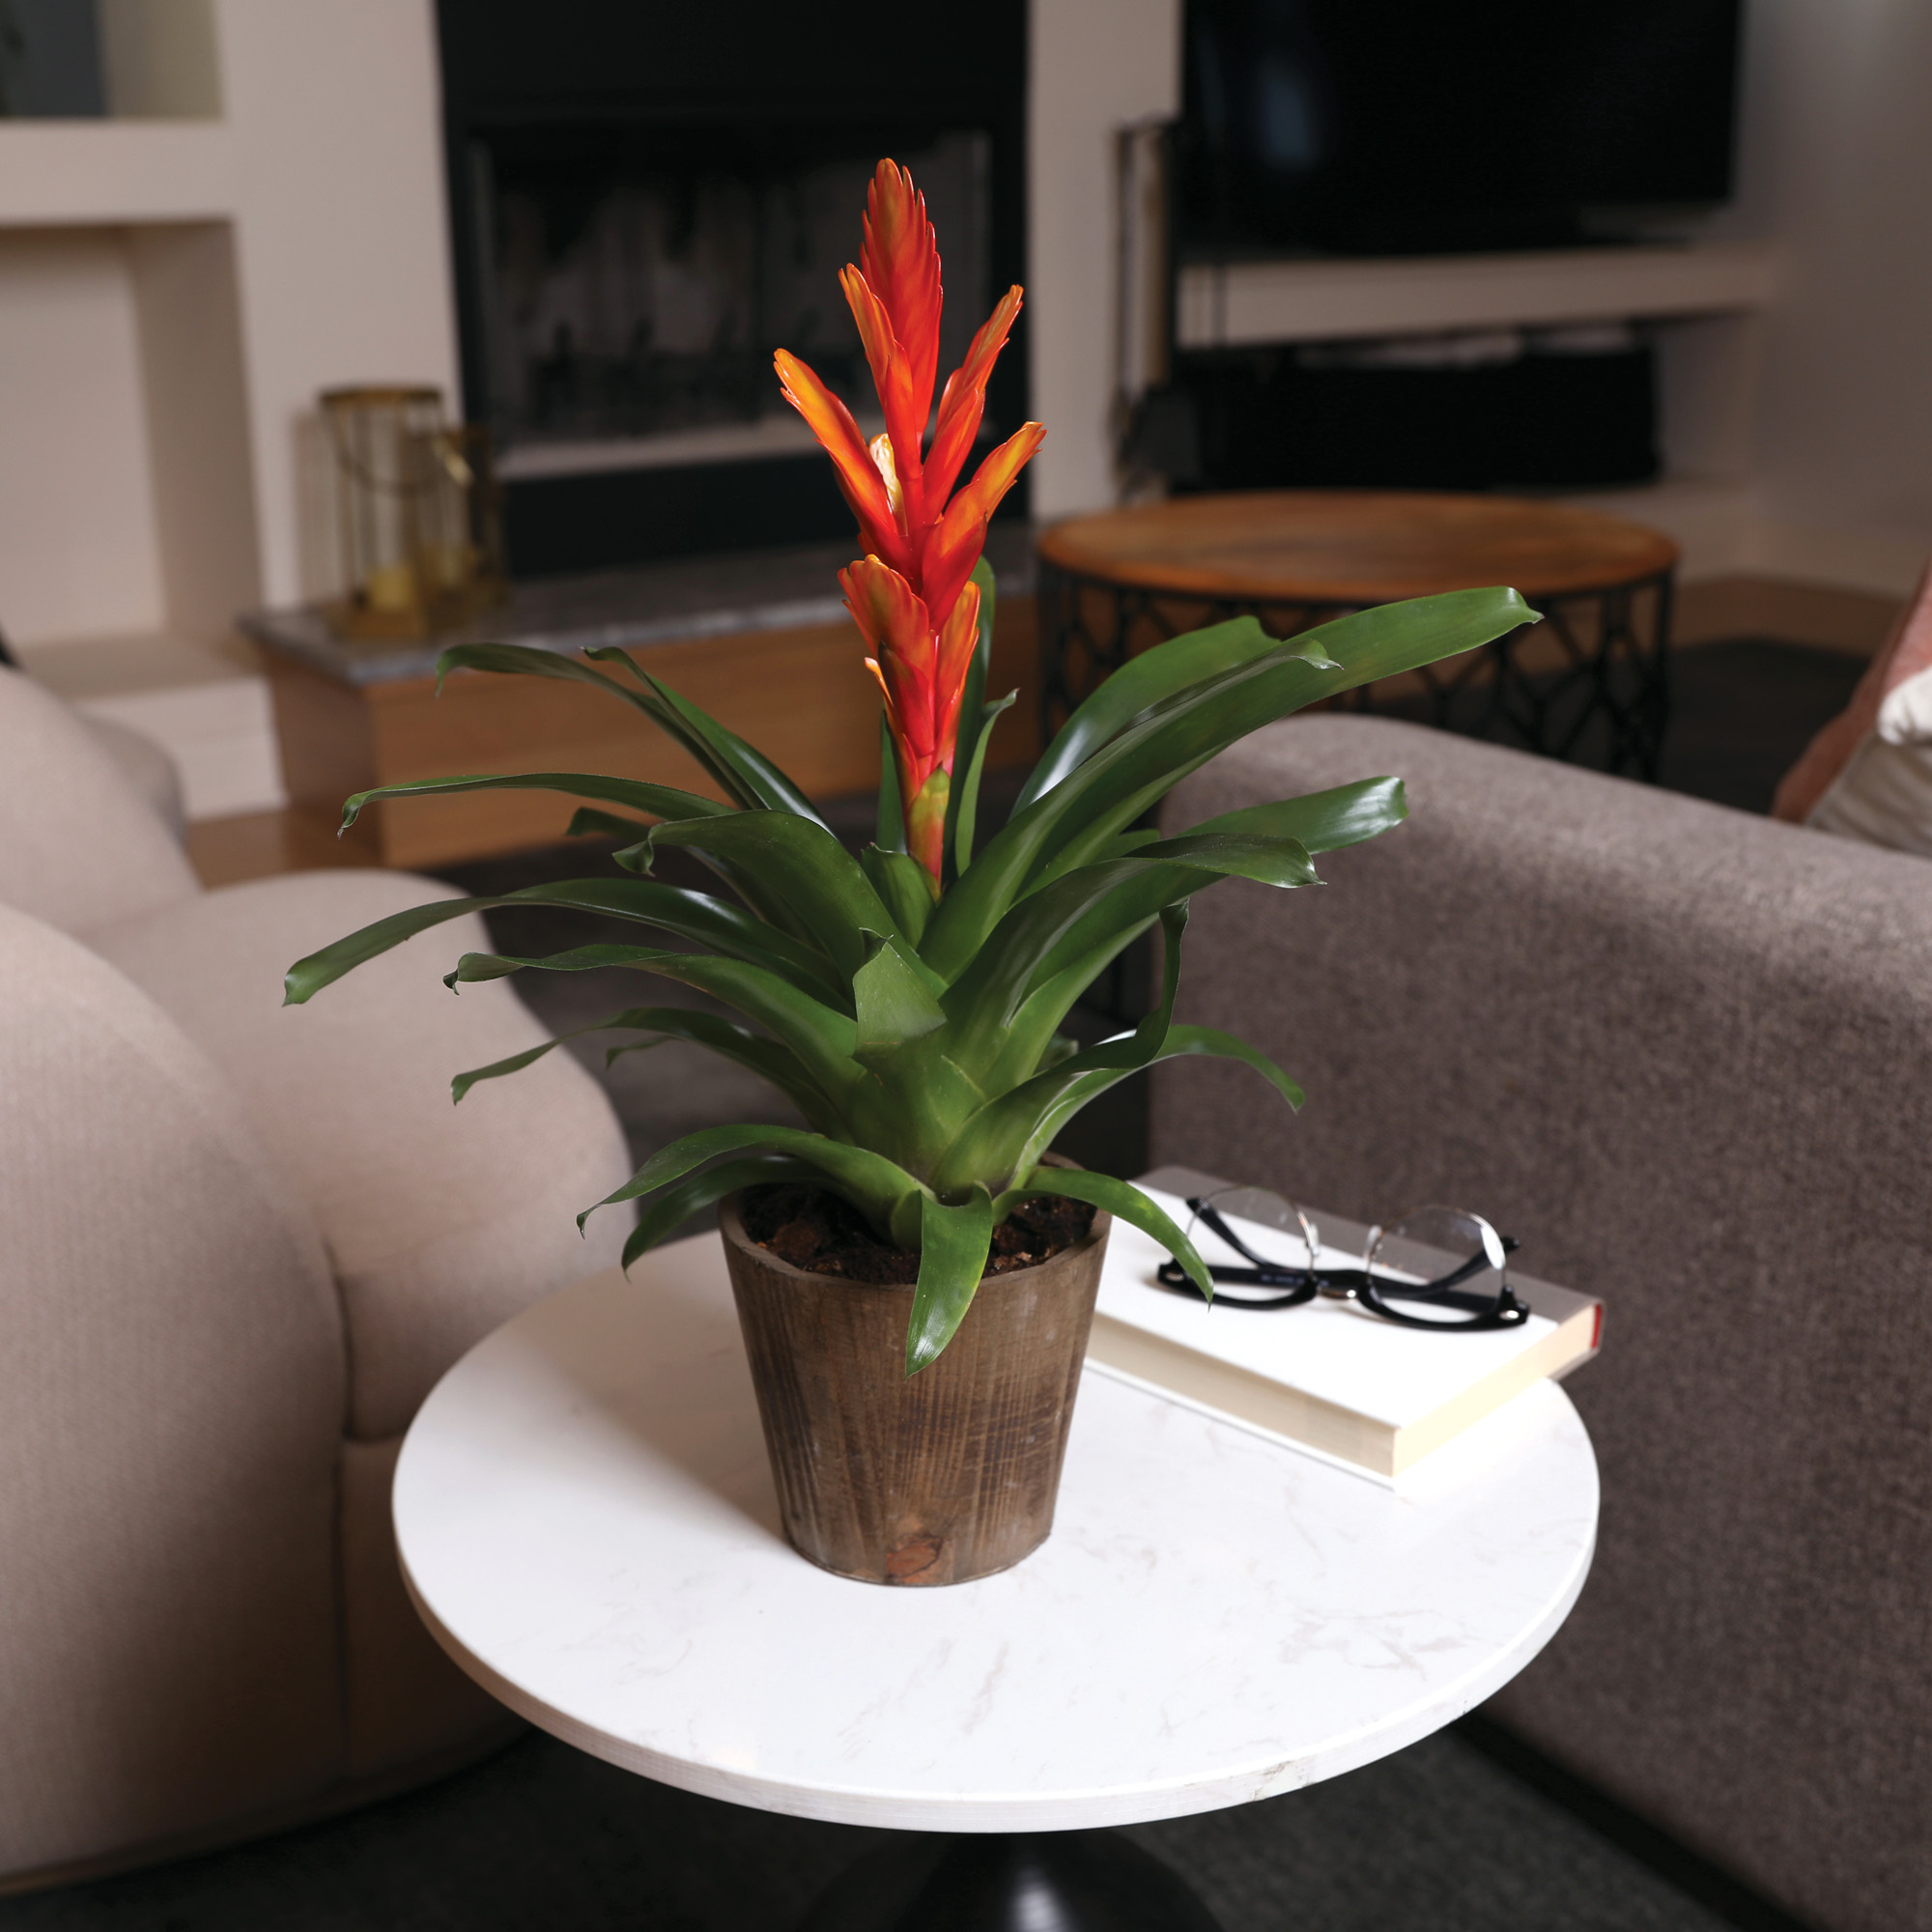 Just Add Ice 15" Tall Orange Vriesea Bromeliad Live Plant in 5" Moss Topped Brown Wood Pot, House Plant - image 3 of 6